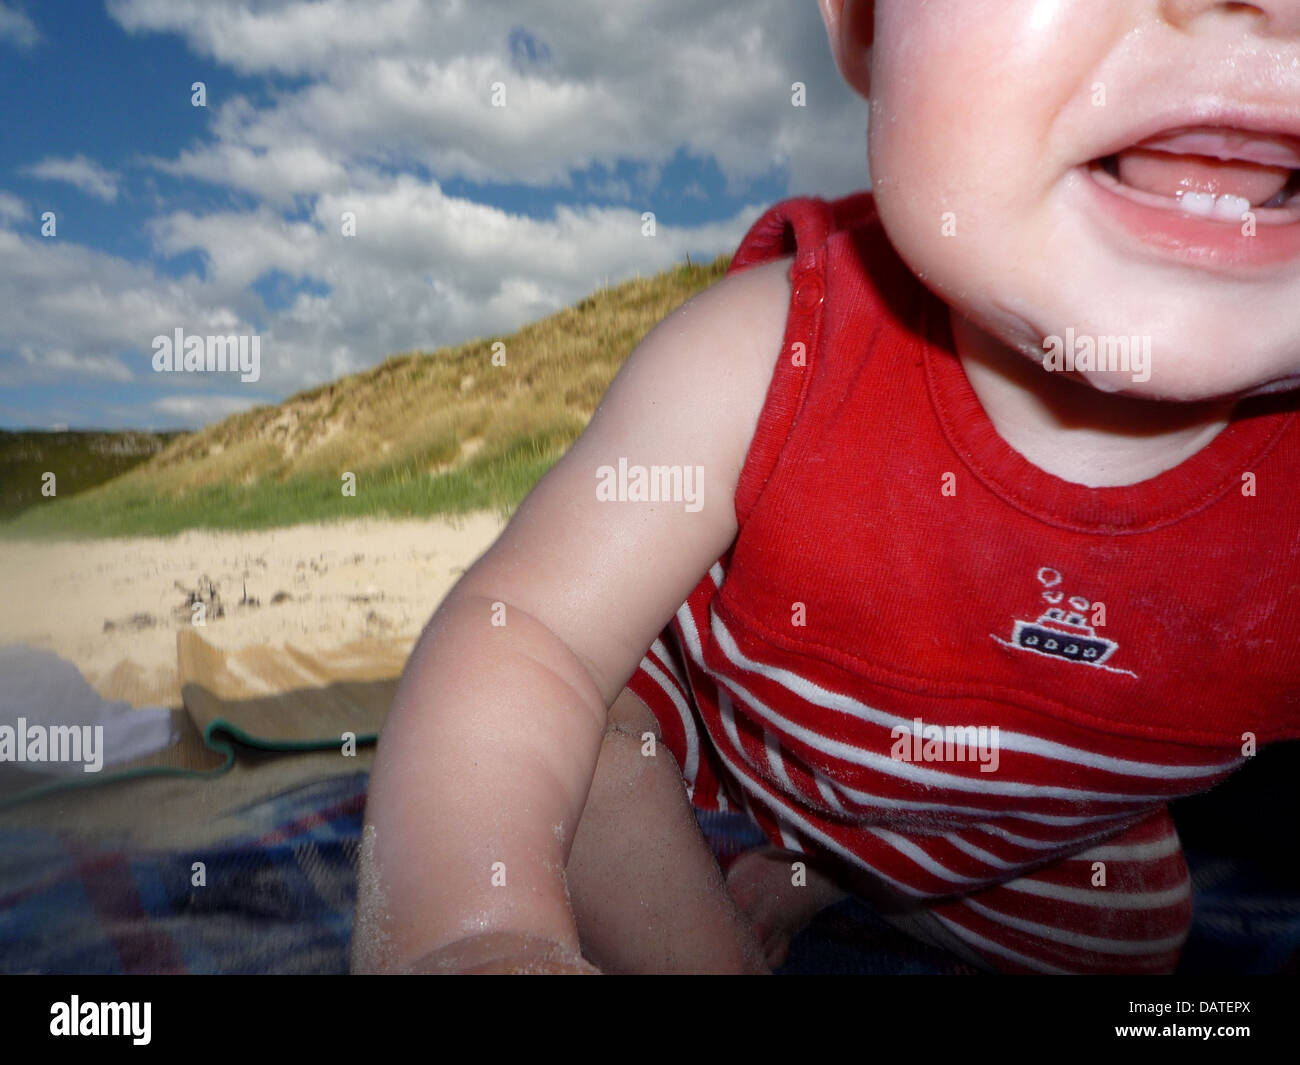 Infant child on beach. Close-up, sand exploration and dribble! Stock Photo